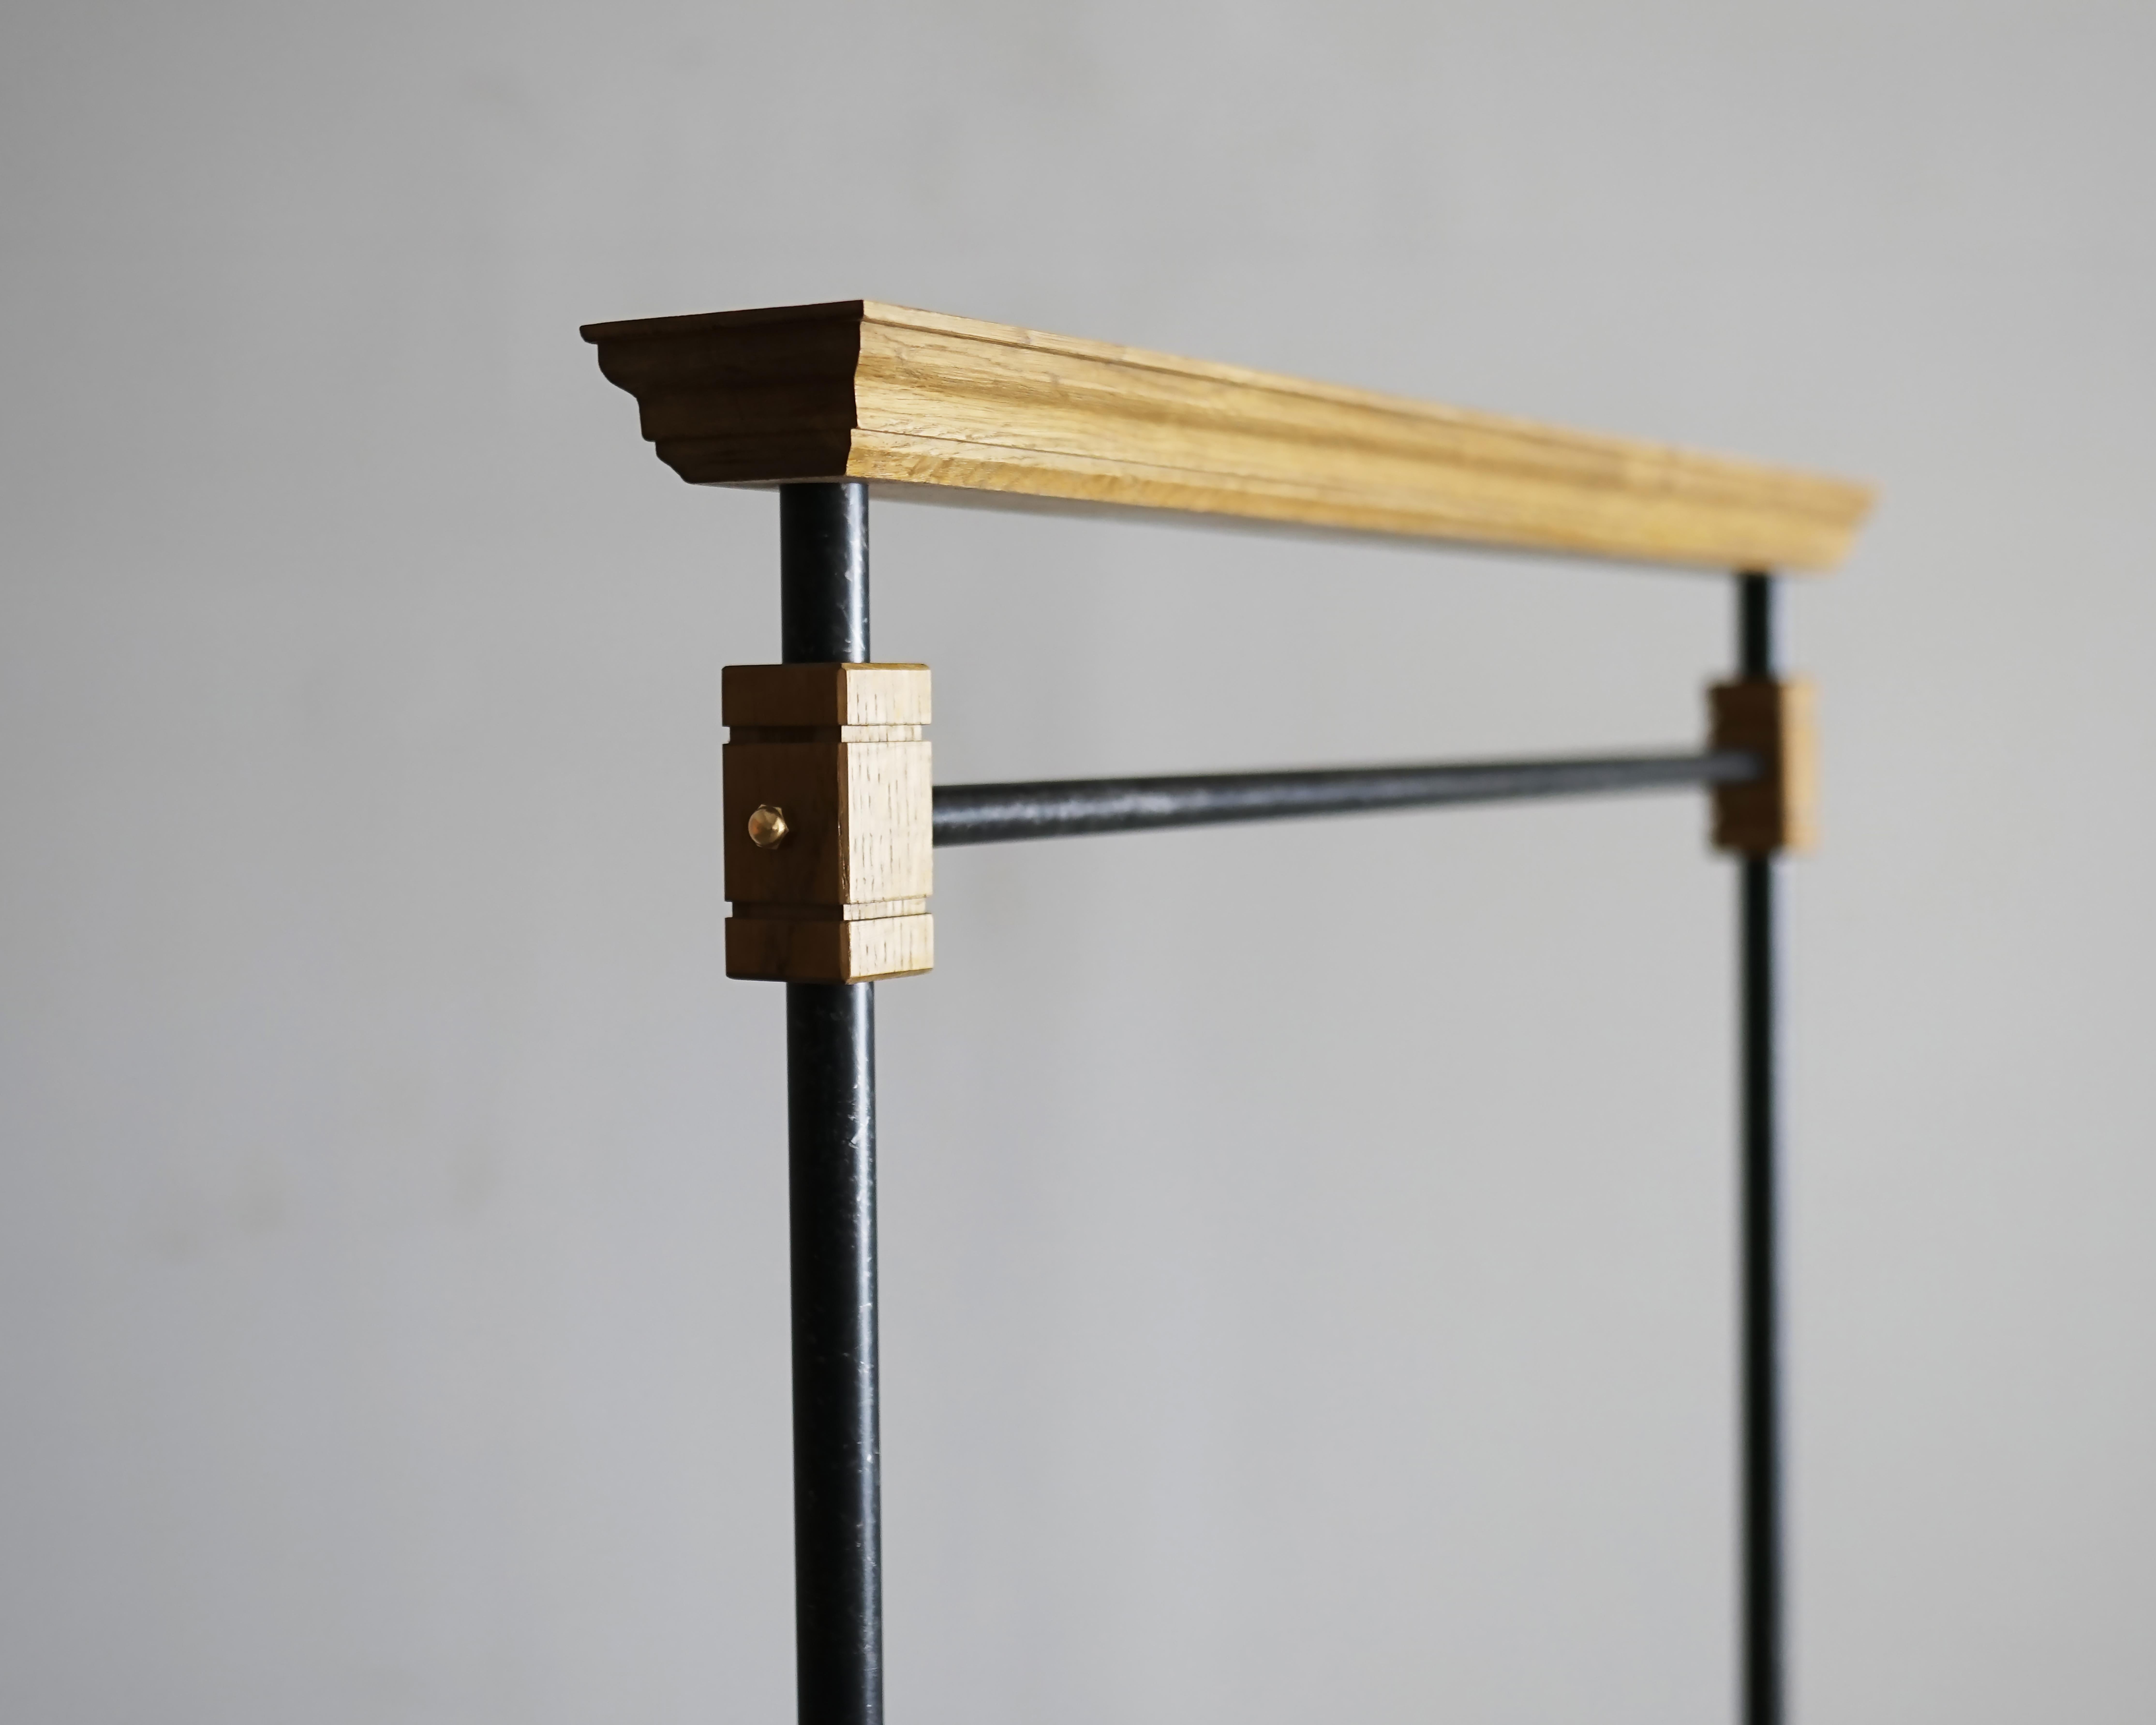 Japanese Contrast Wood and Iron Hanger